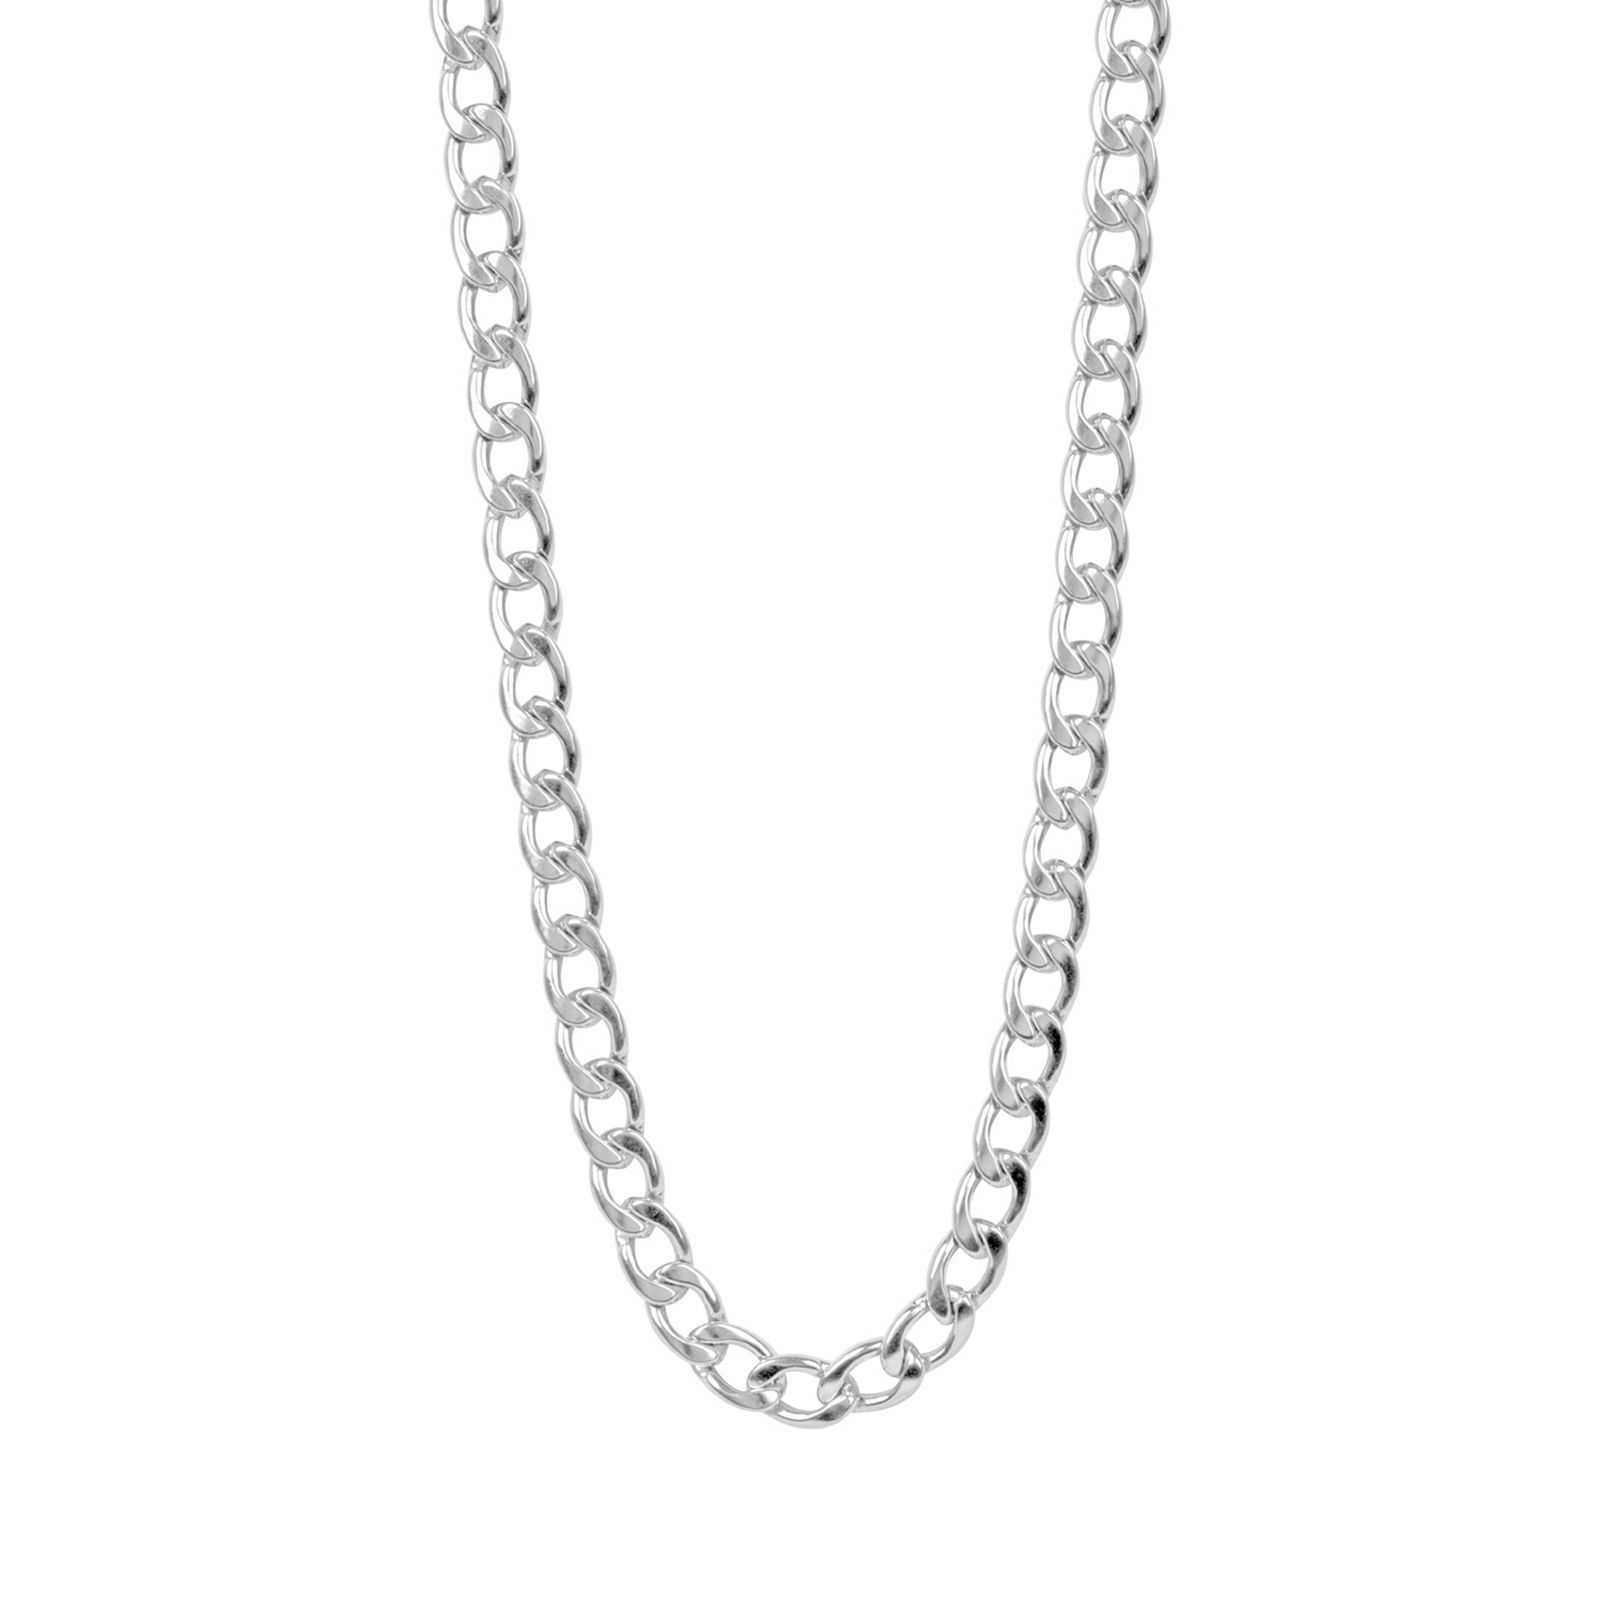 Men's Stainless Steel Round Curb Chain Necklace, Size: 24"", Silver | Kohl's